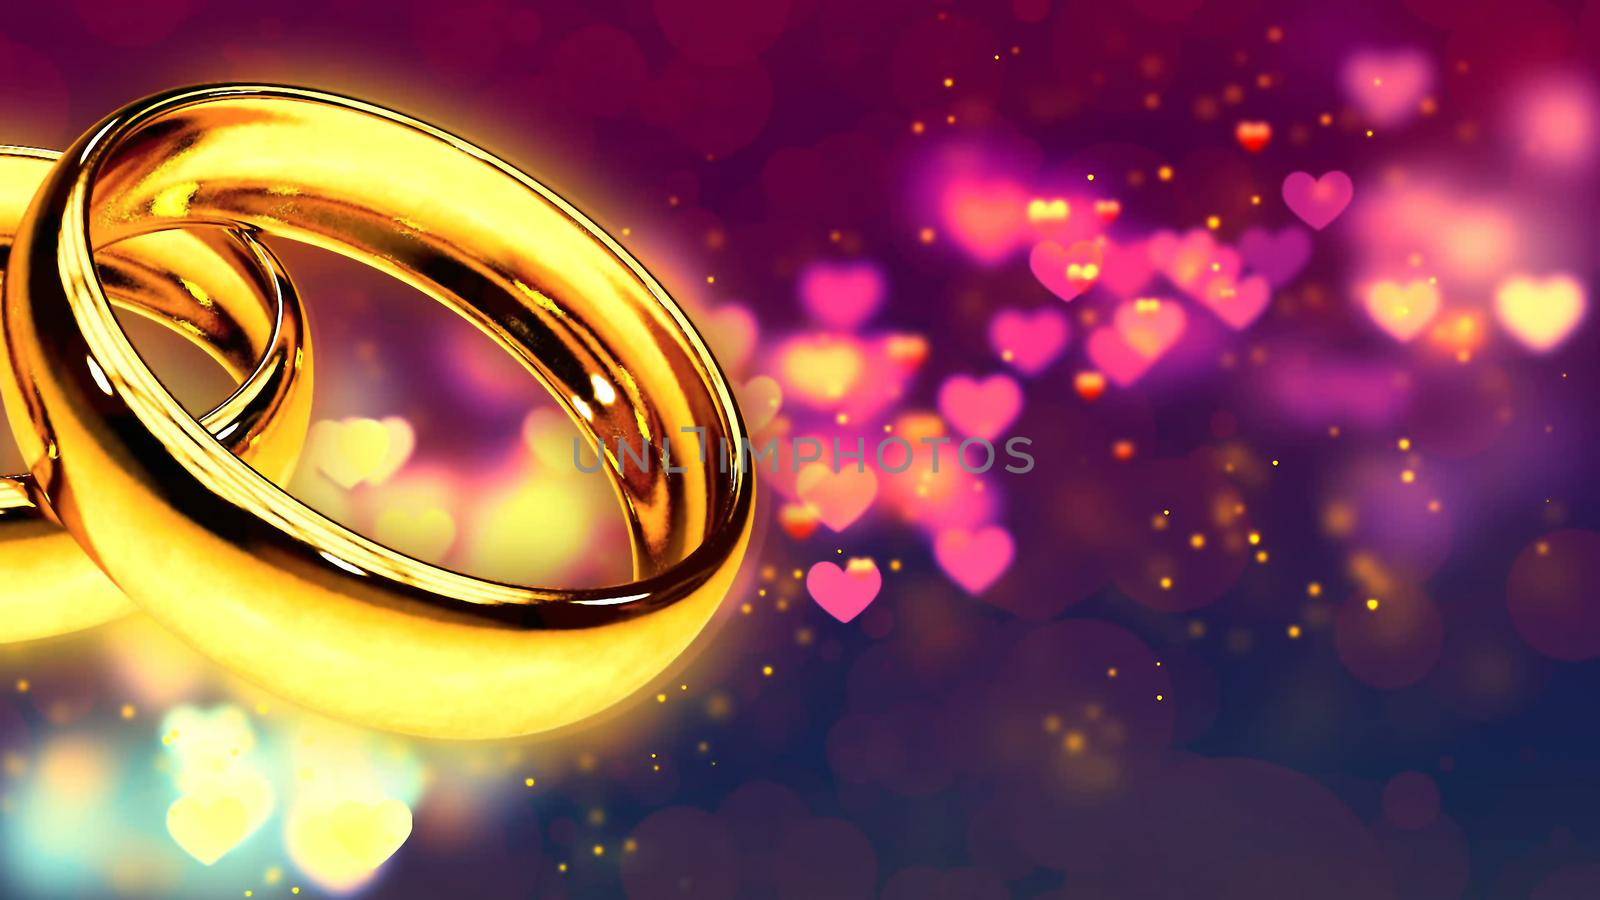 Background with two gold rings 3D rendering by designprojects